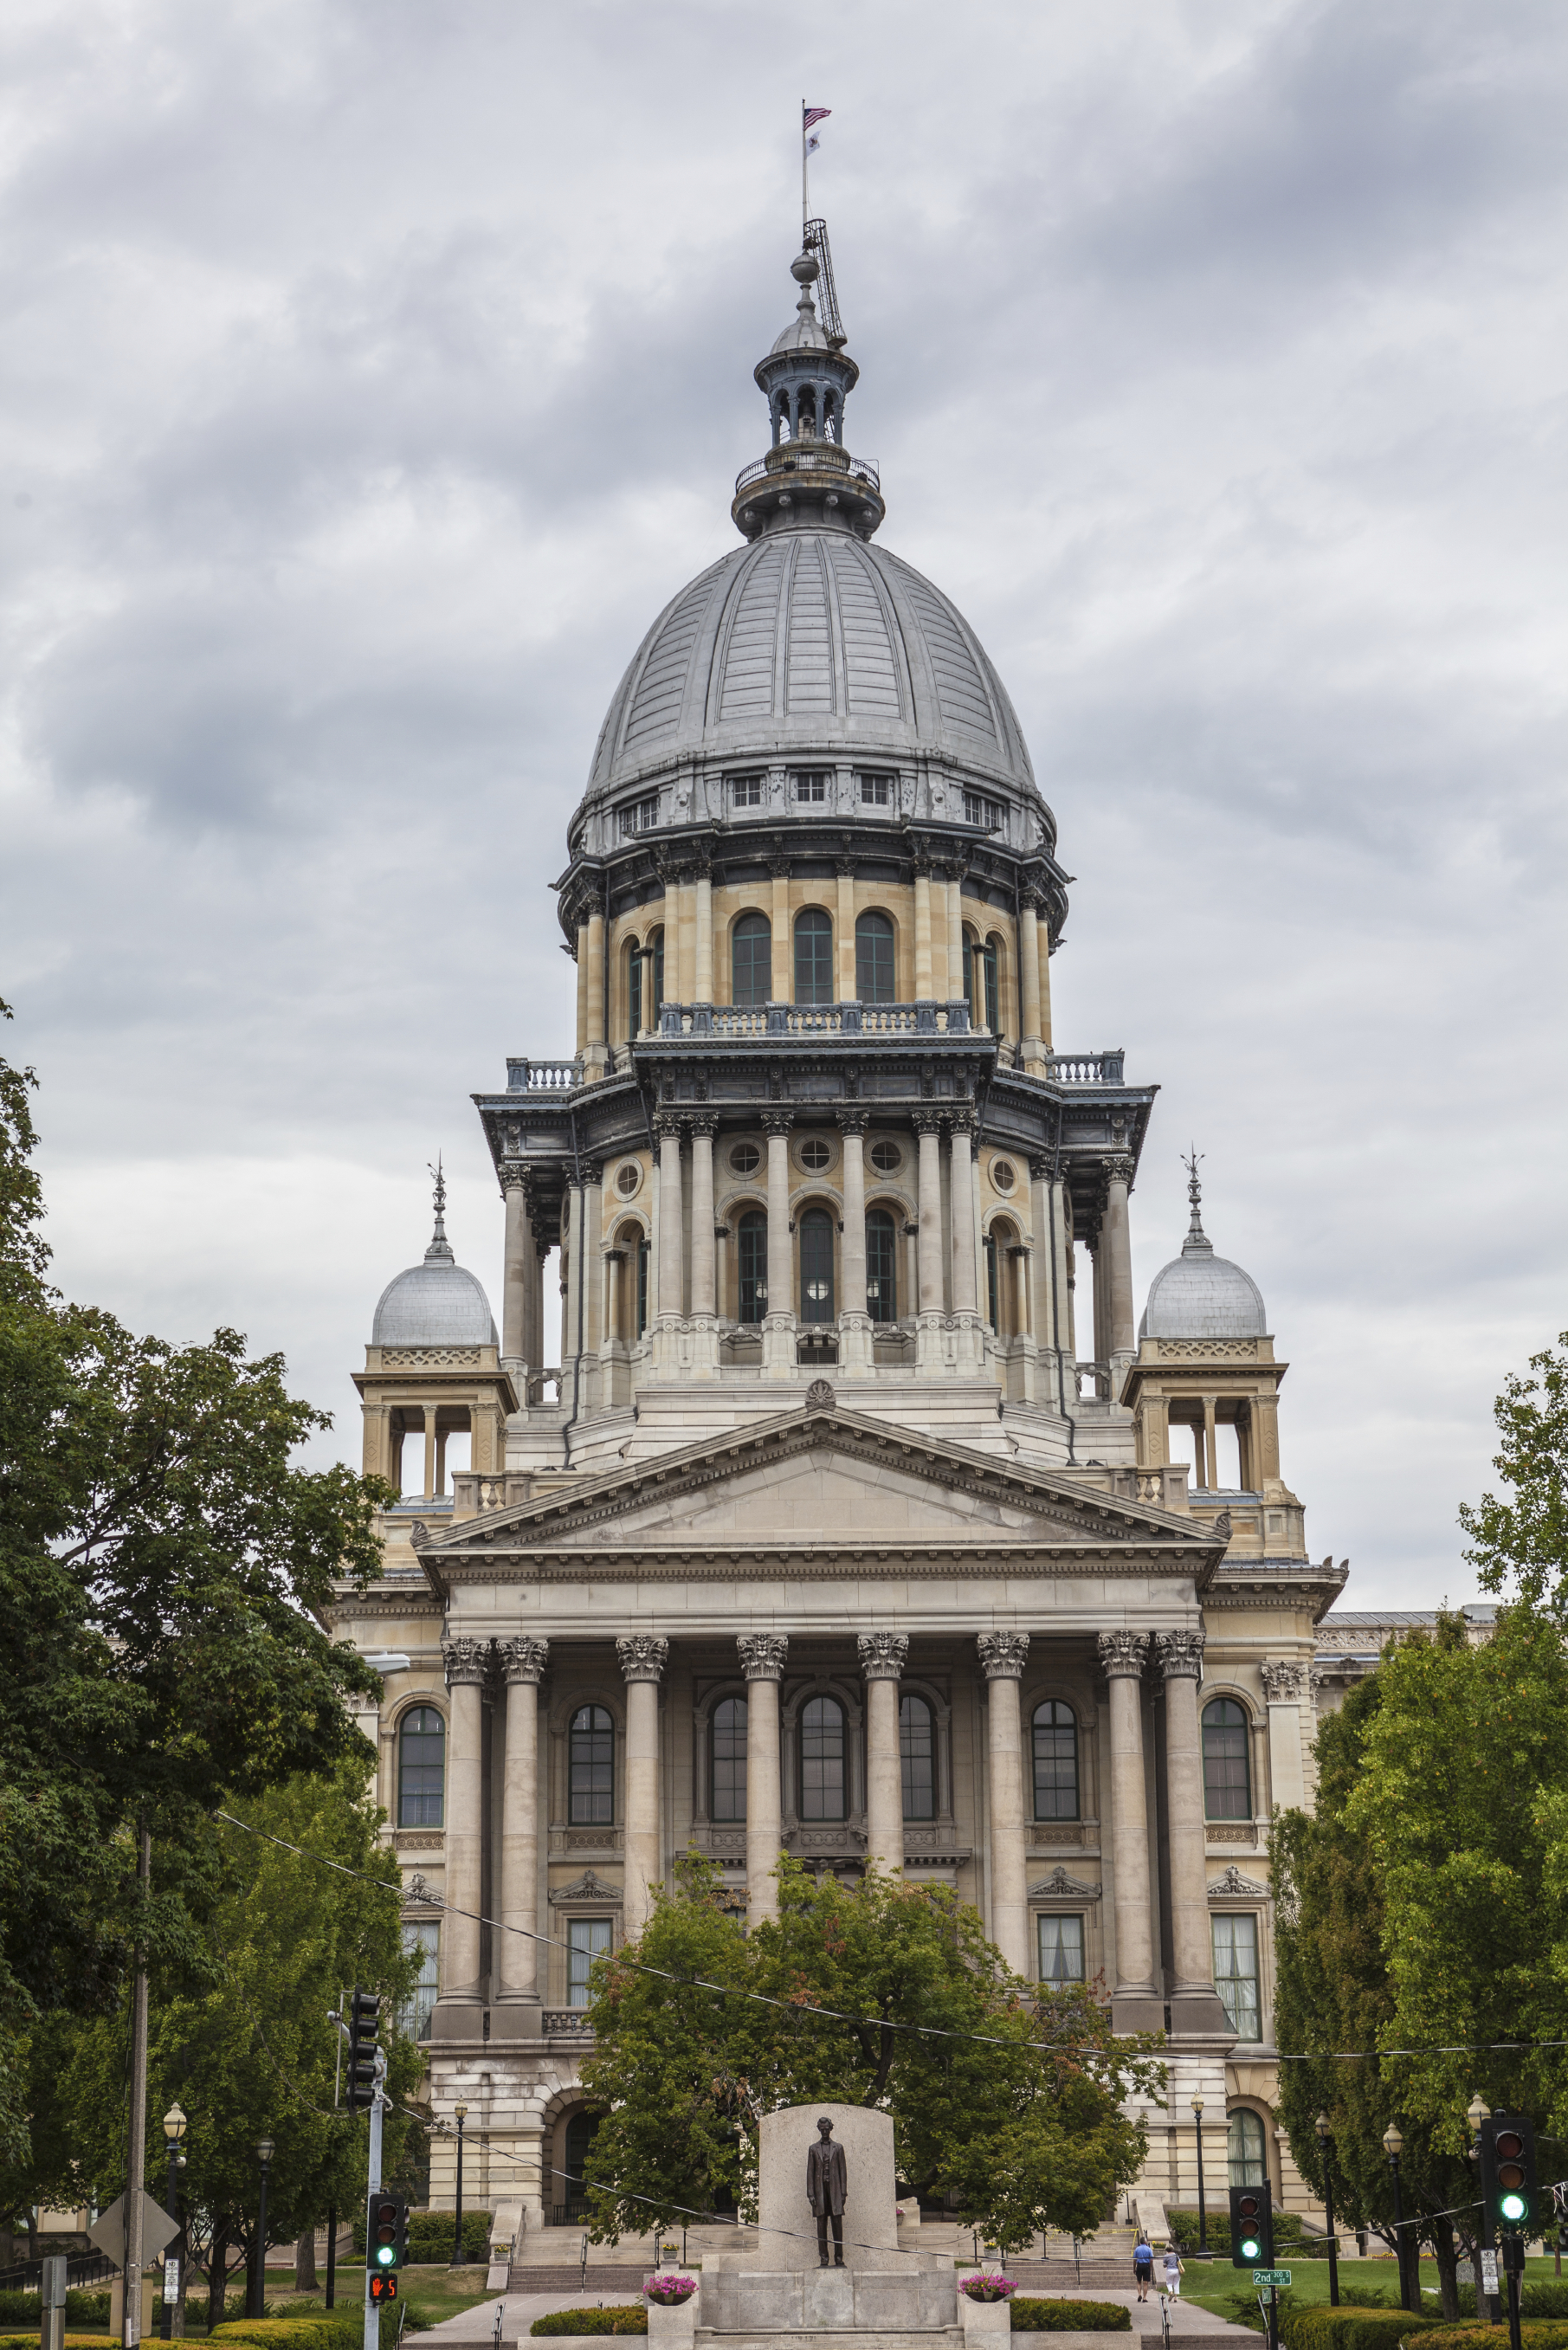 http://www.istockphoto.com/photo/illinois-state-house-and-capitol-building-21414378